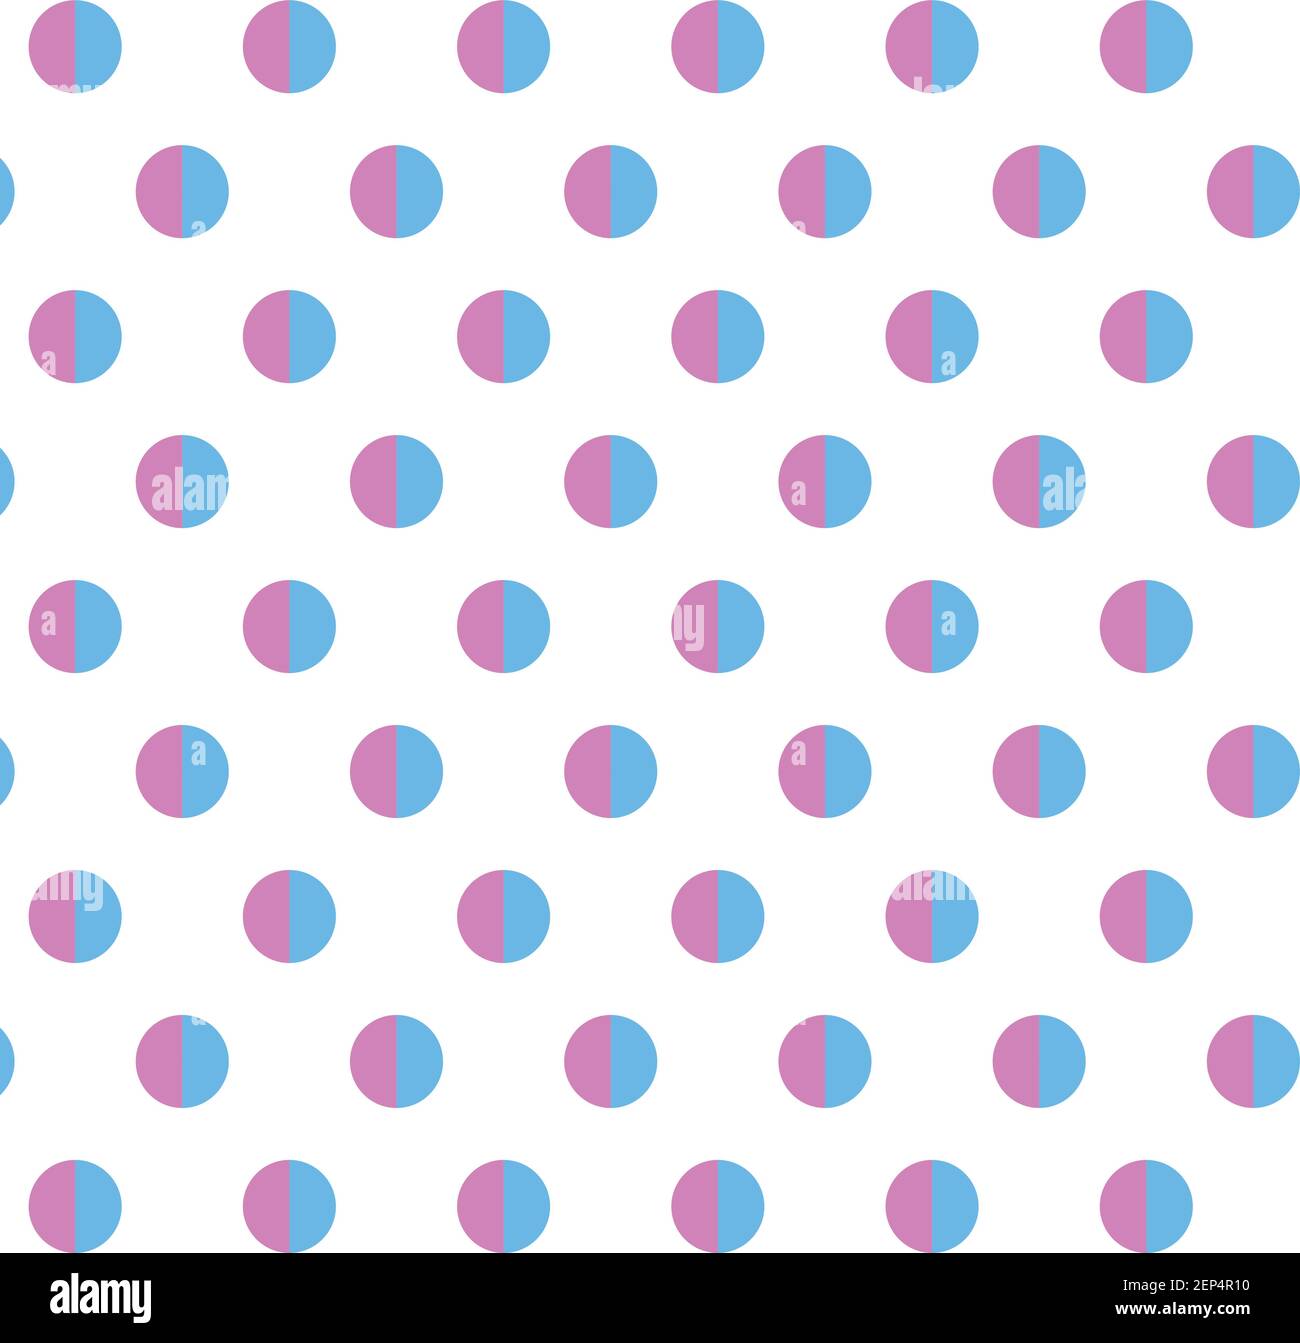 Polka dot in purple blue on white pattern background for texture printing, dress, textile, giftwrapping Stock Vector